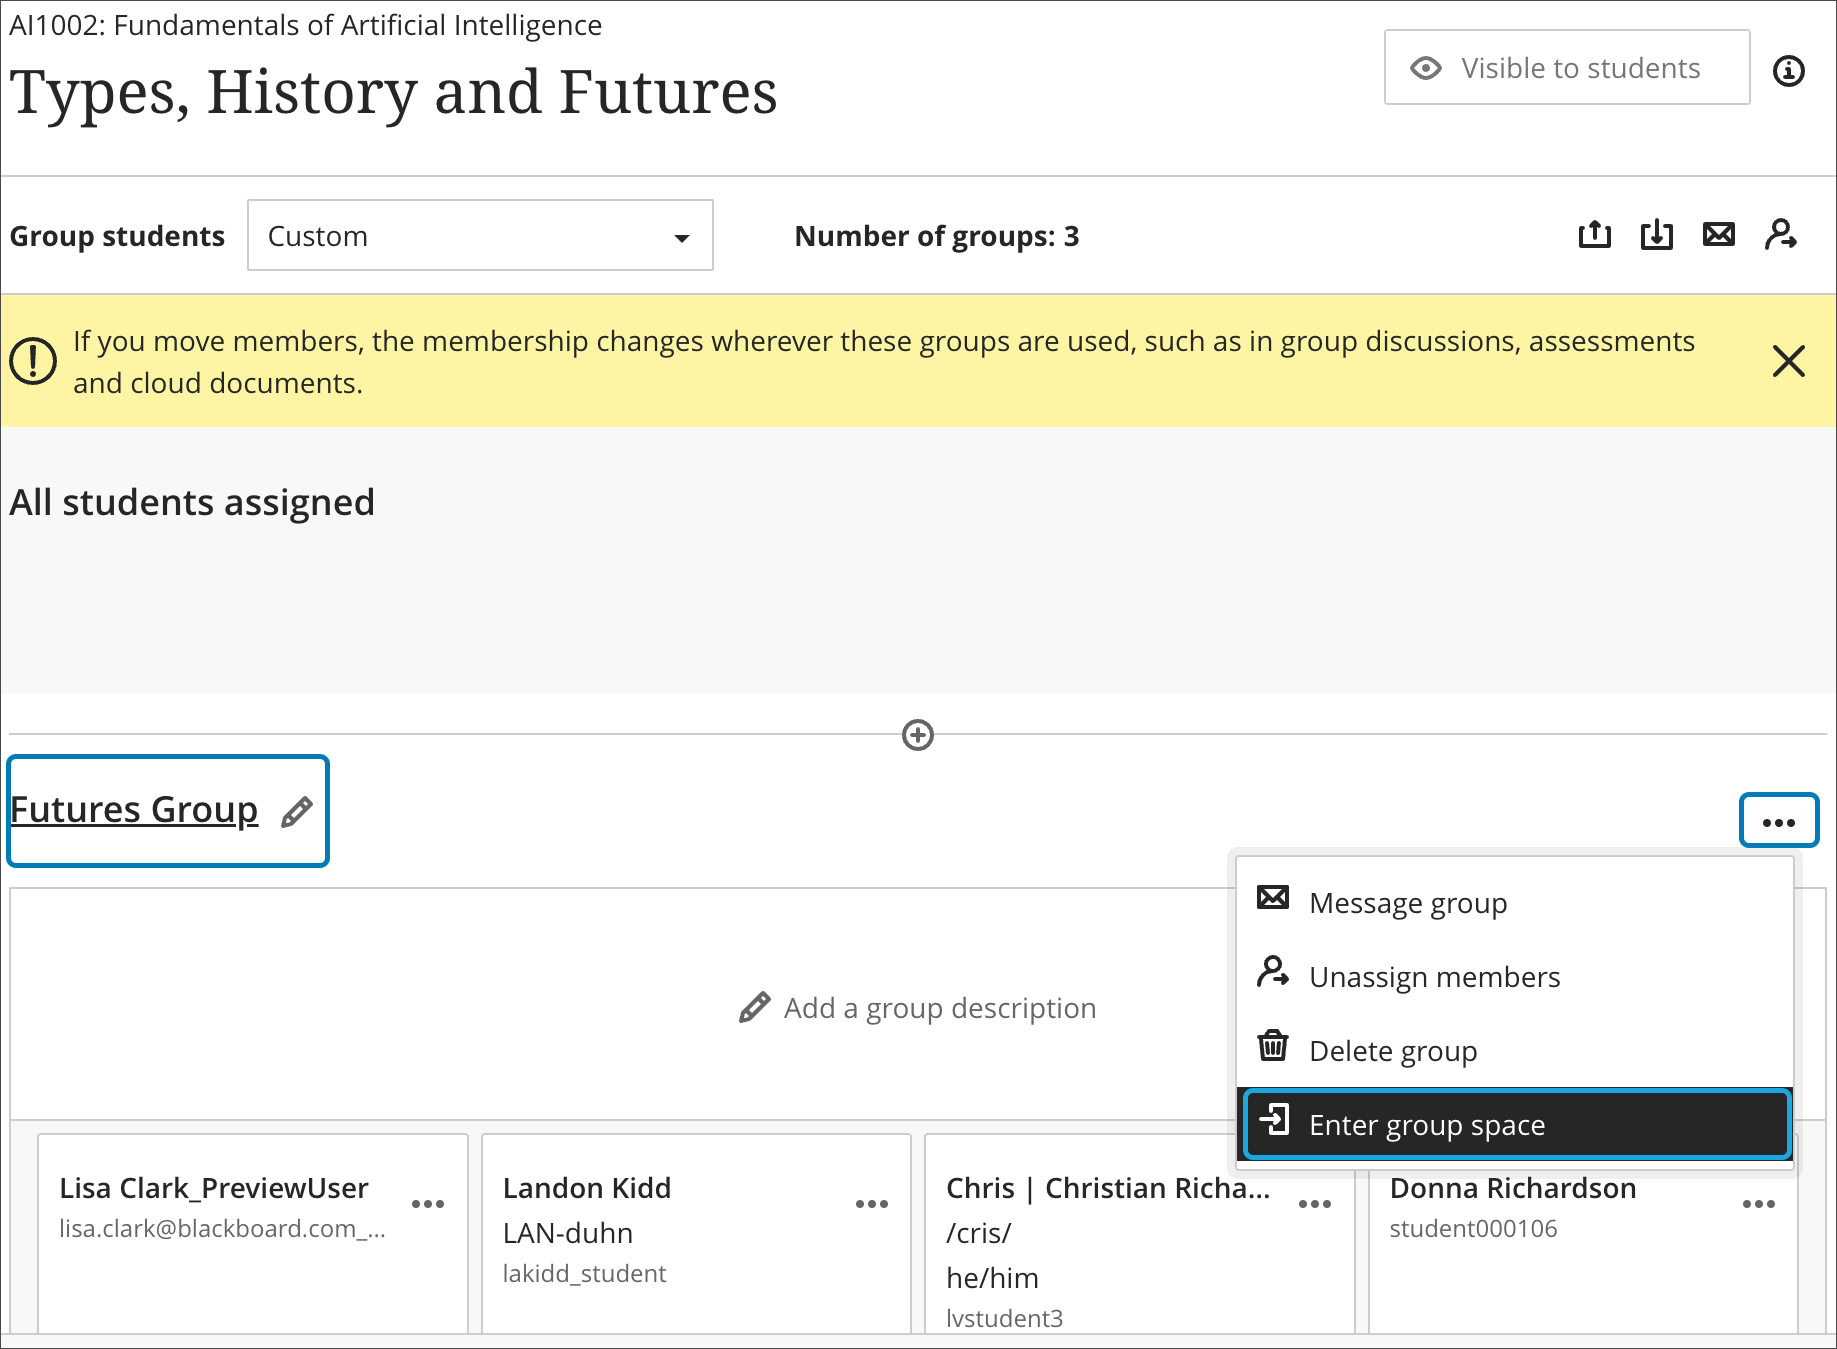 Instructor view - Access to Group Spaces from Group Management